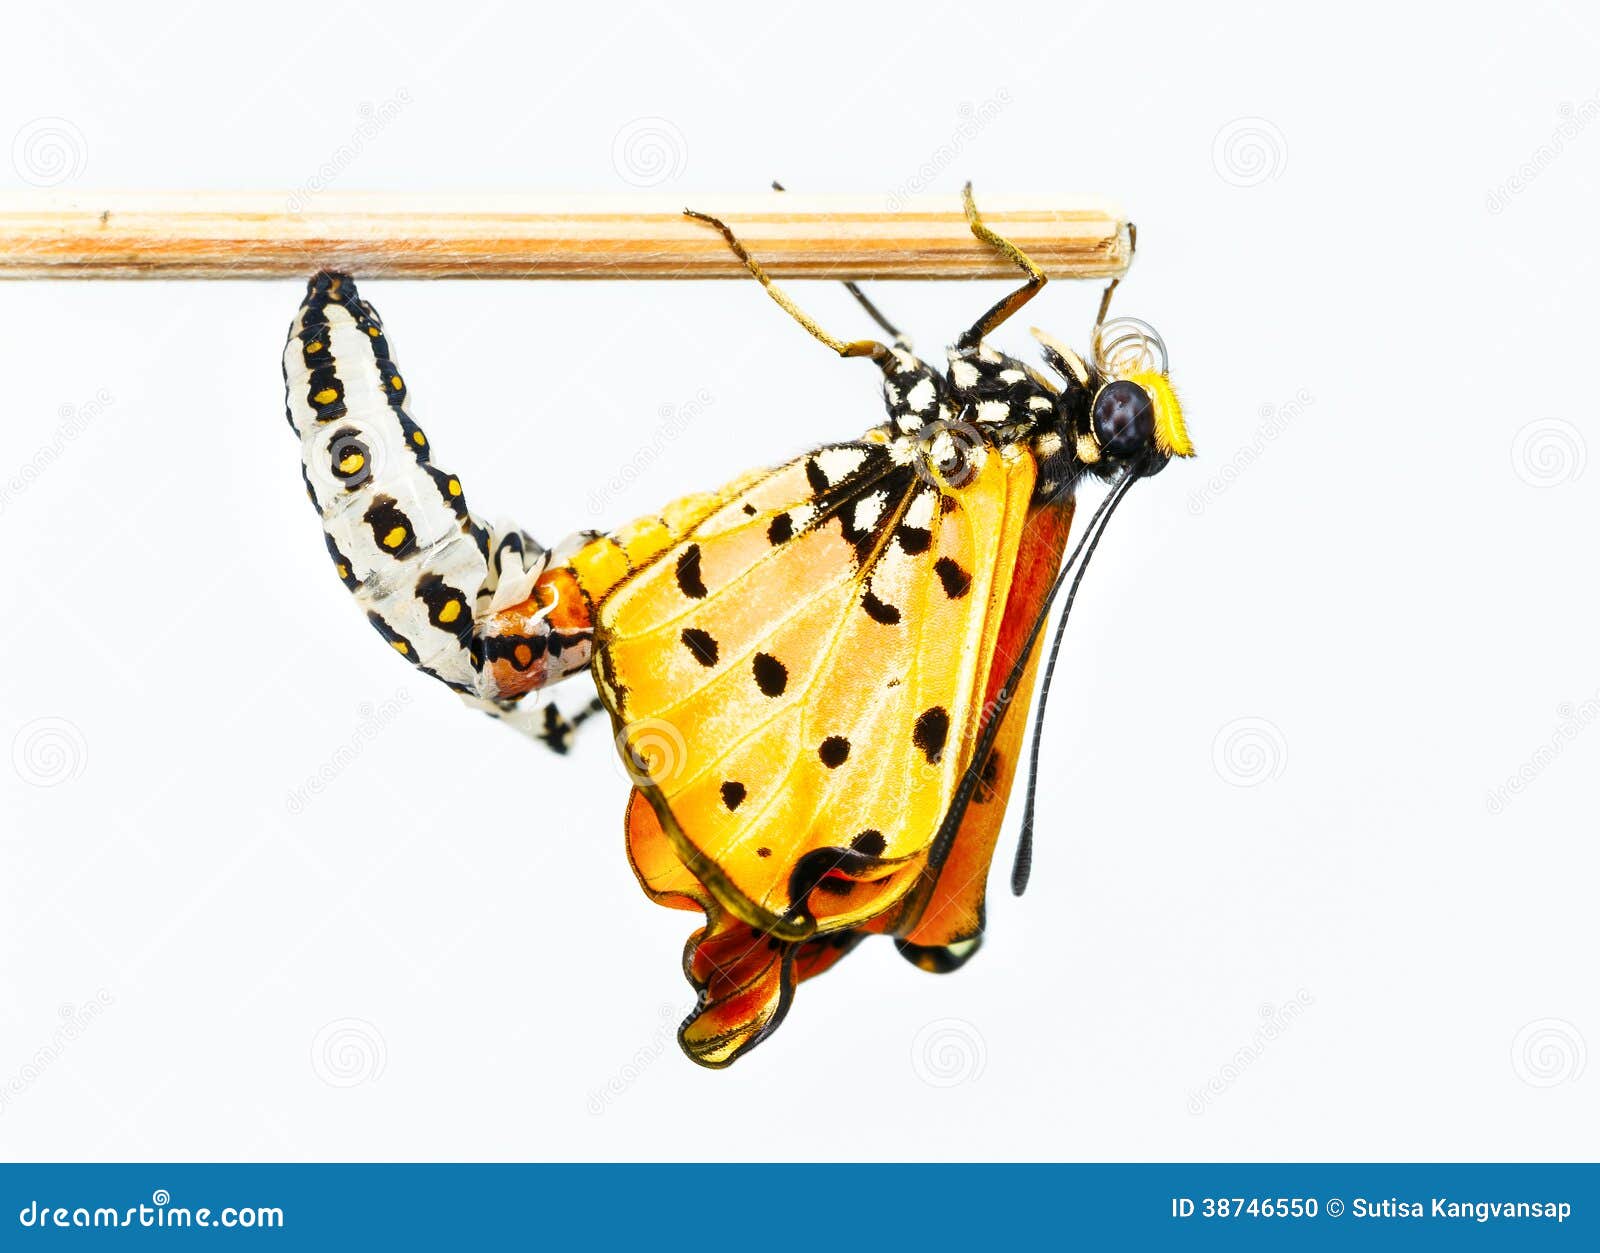 Tawny Coster Butterfly Emerging From Cocoon Stock Photo ...